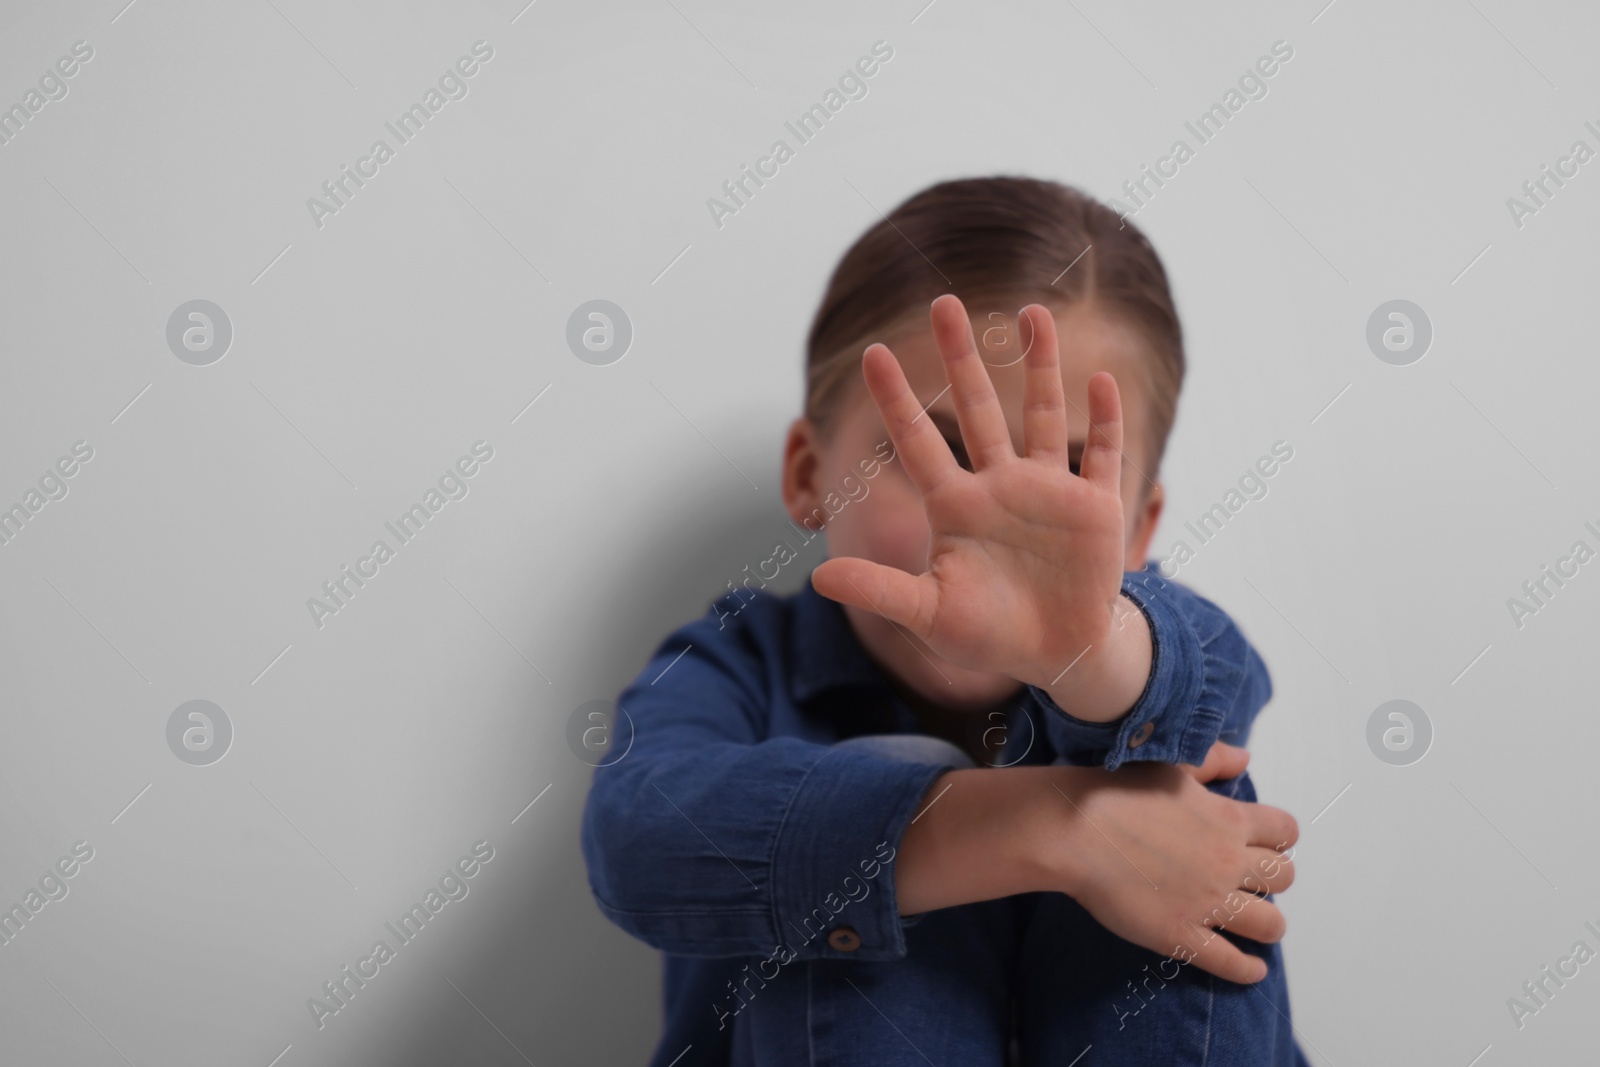 Photo of Child abuse. Girl making stop gesture near grey wall, selective focus. Space for text